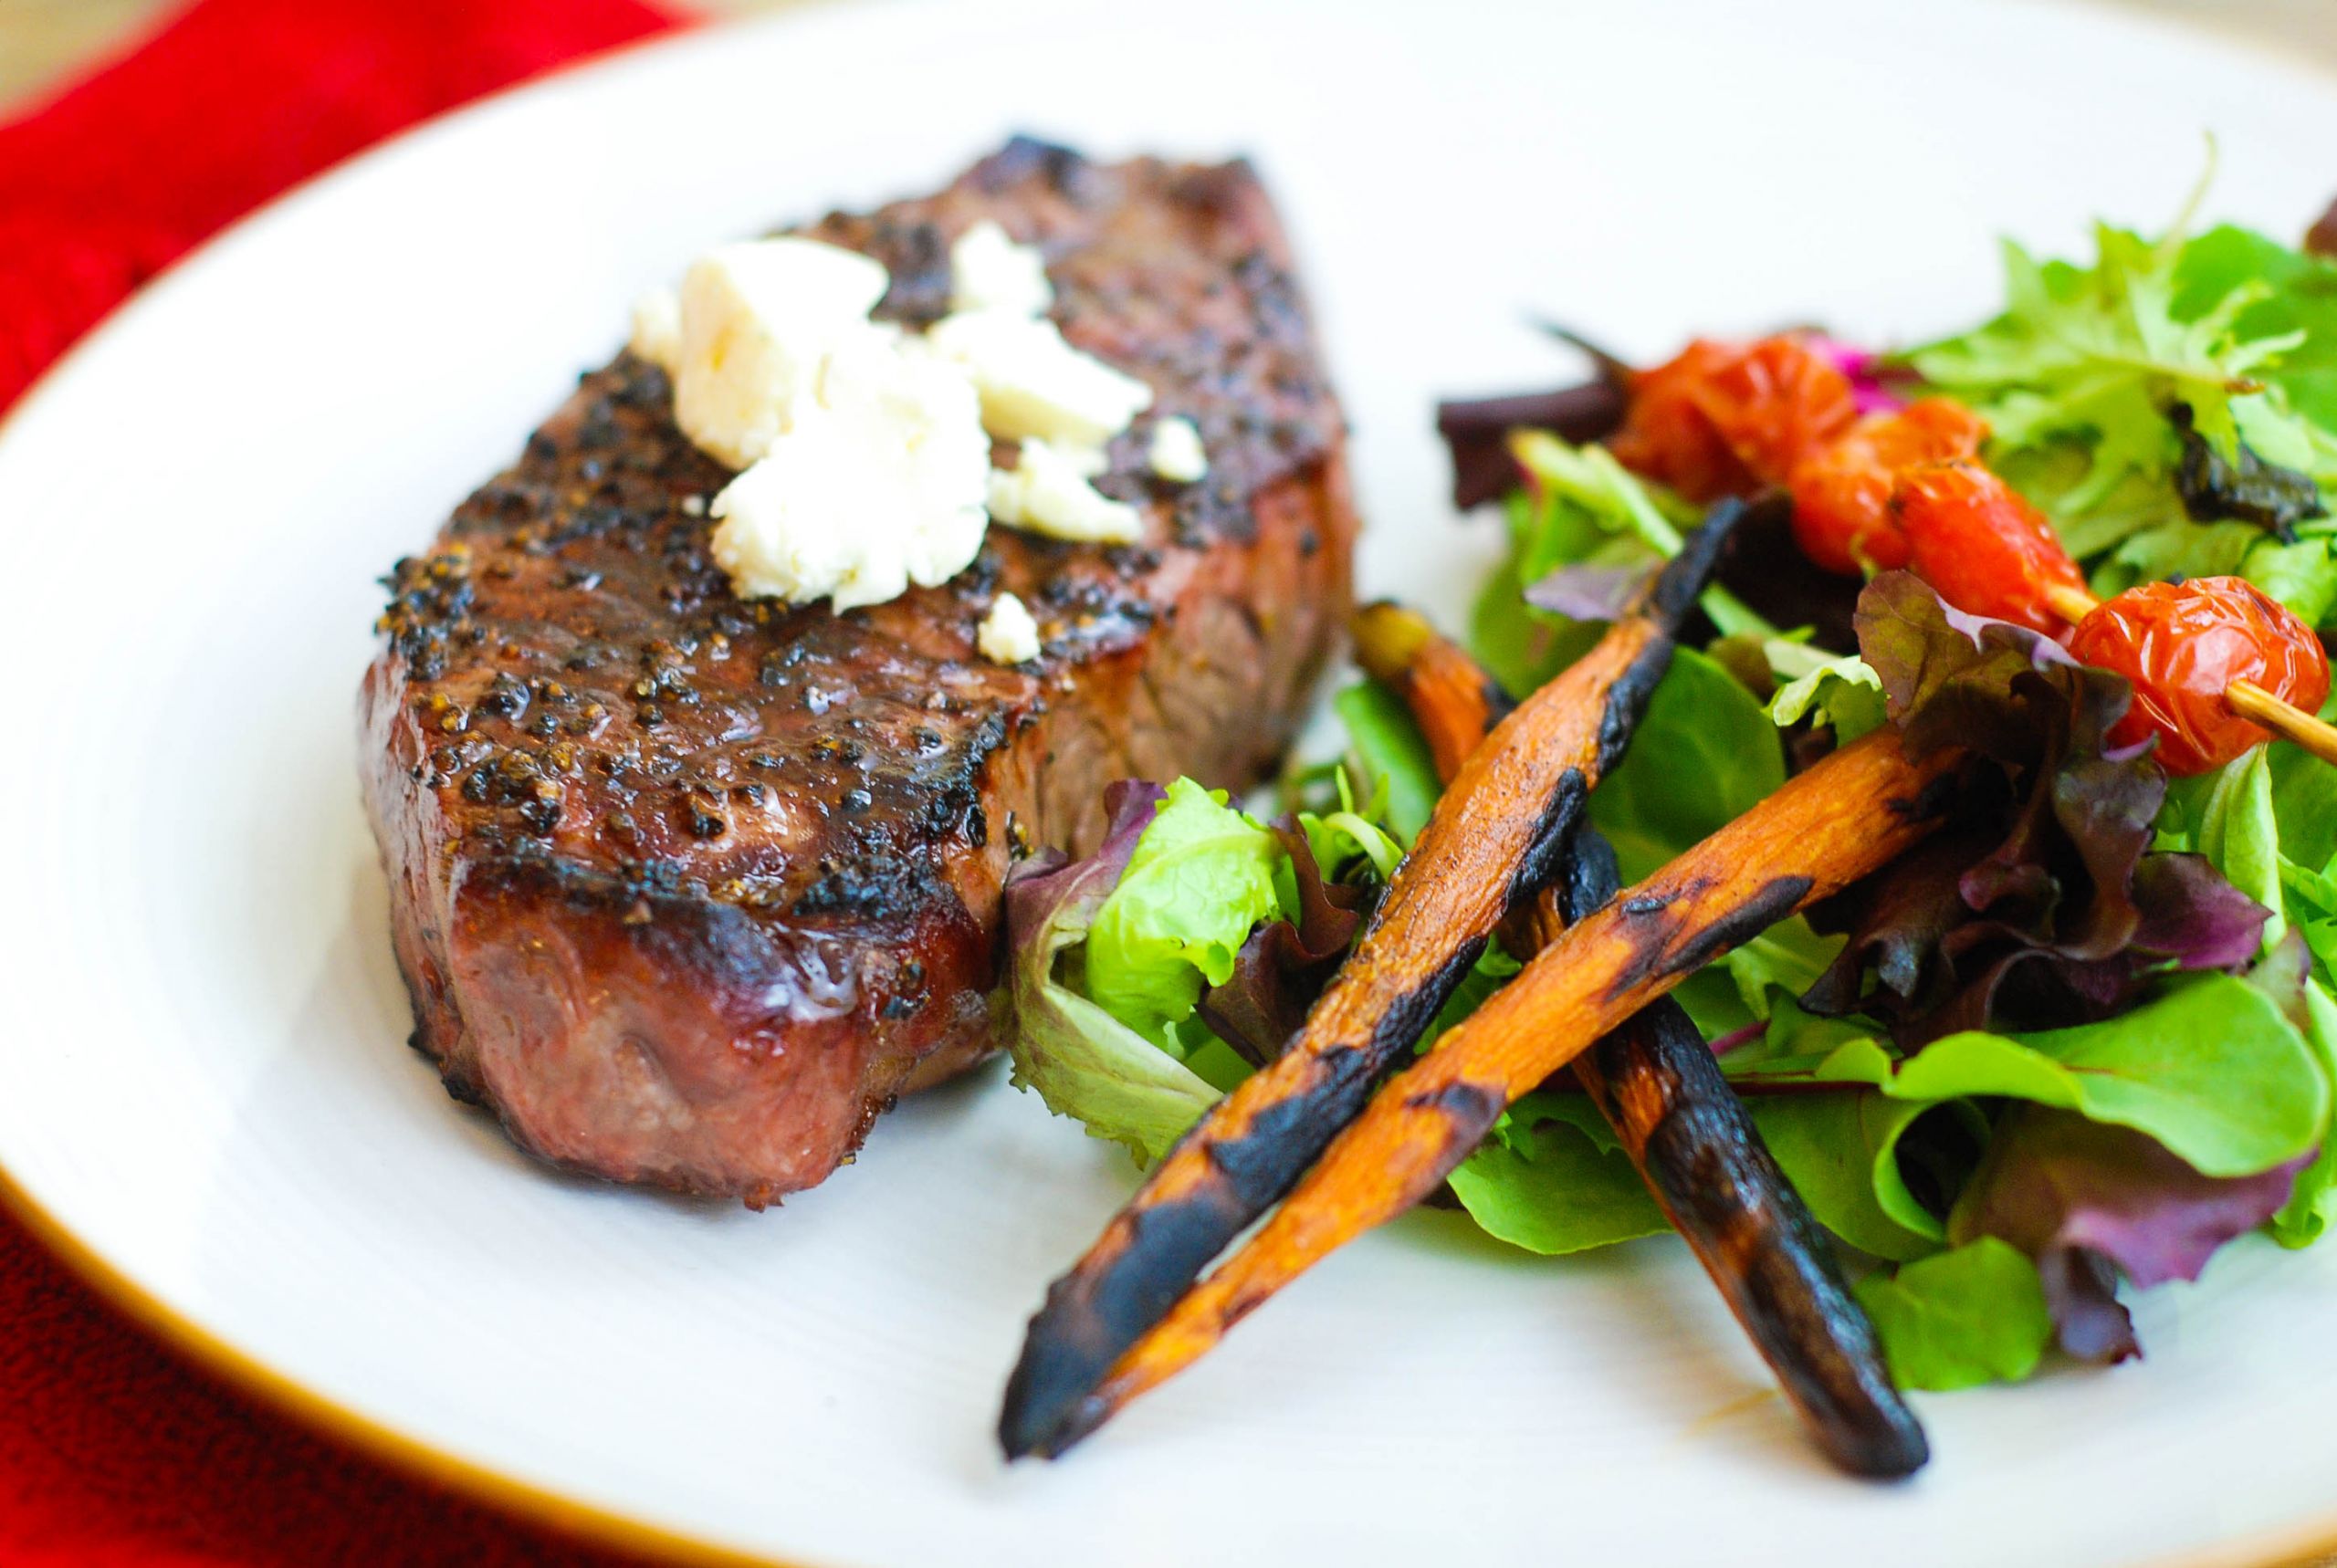 Side Dishes For Steak
 7 Side Dishes That Are Perfect With a Grilled Steak